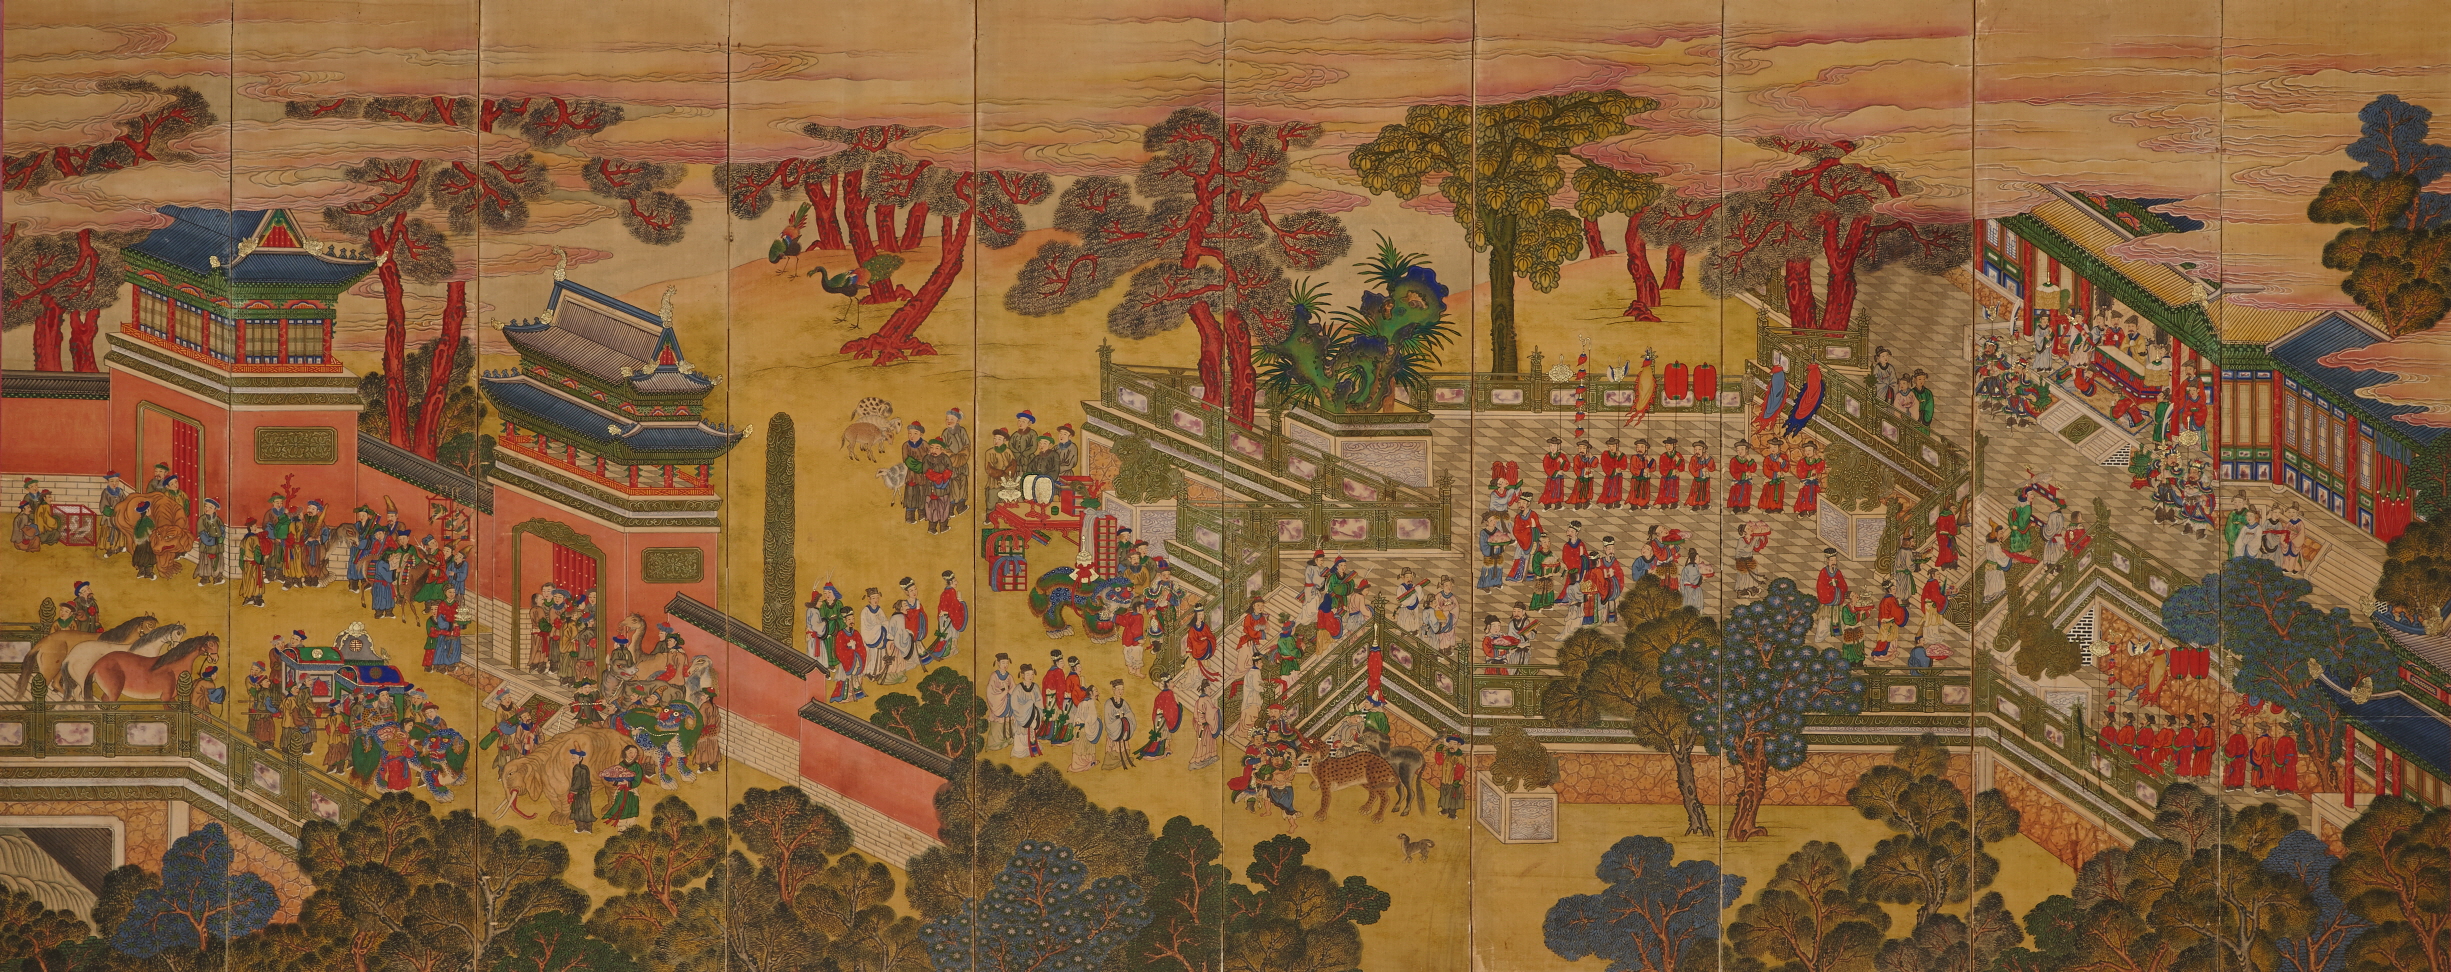 Illustration of Tributary Missions, 10-fold Folding Screen